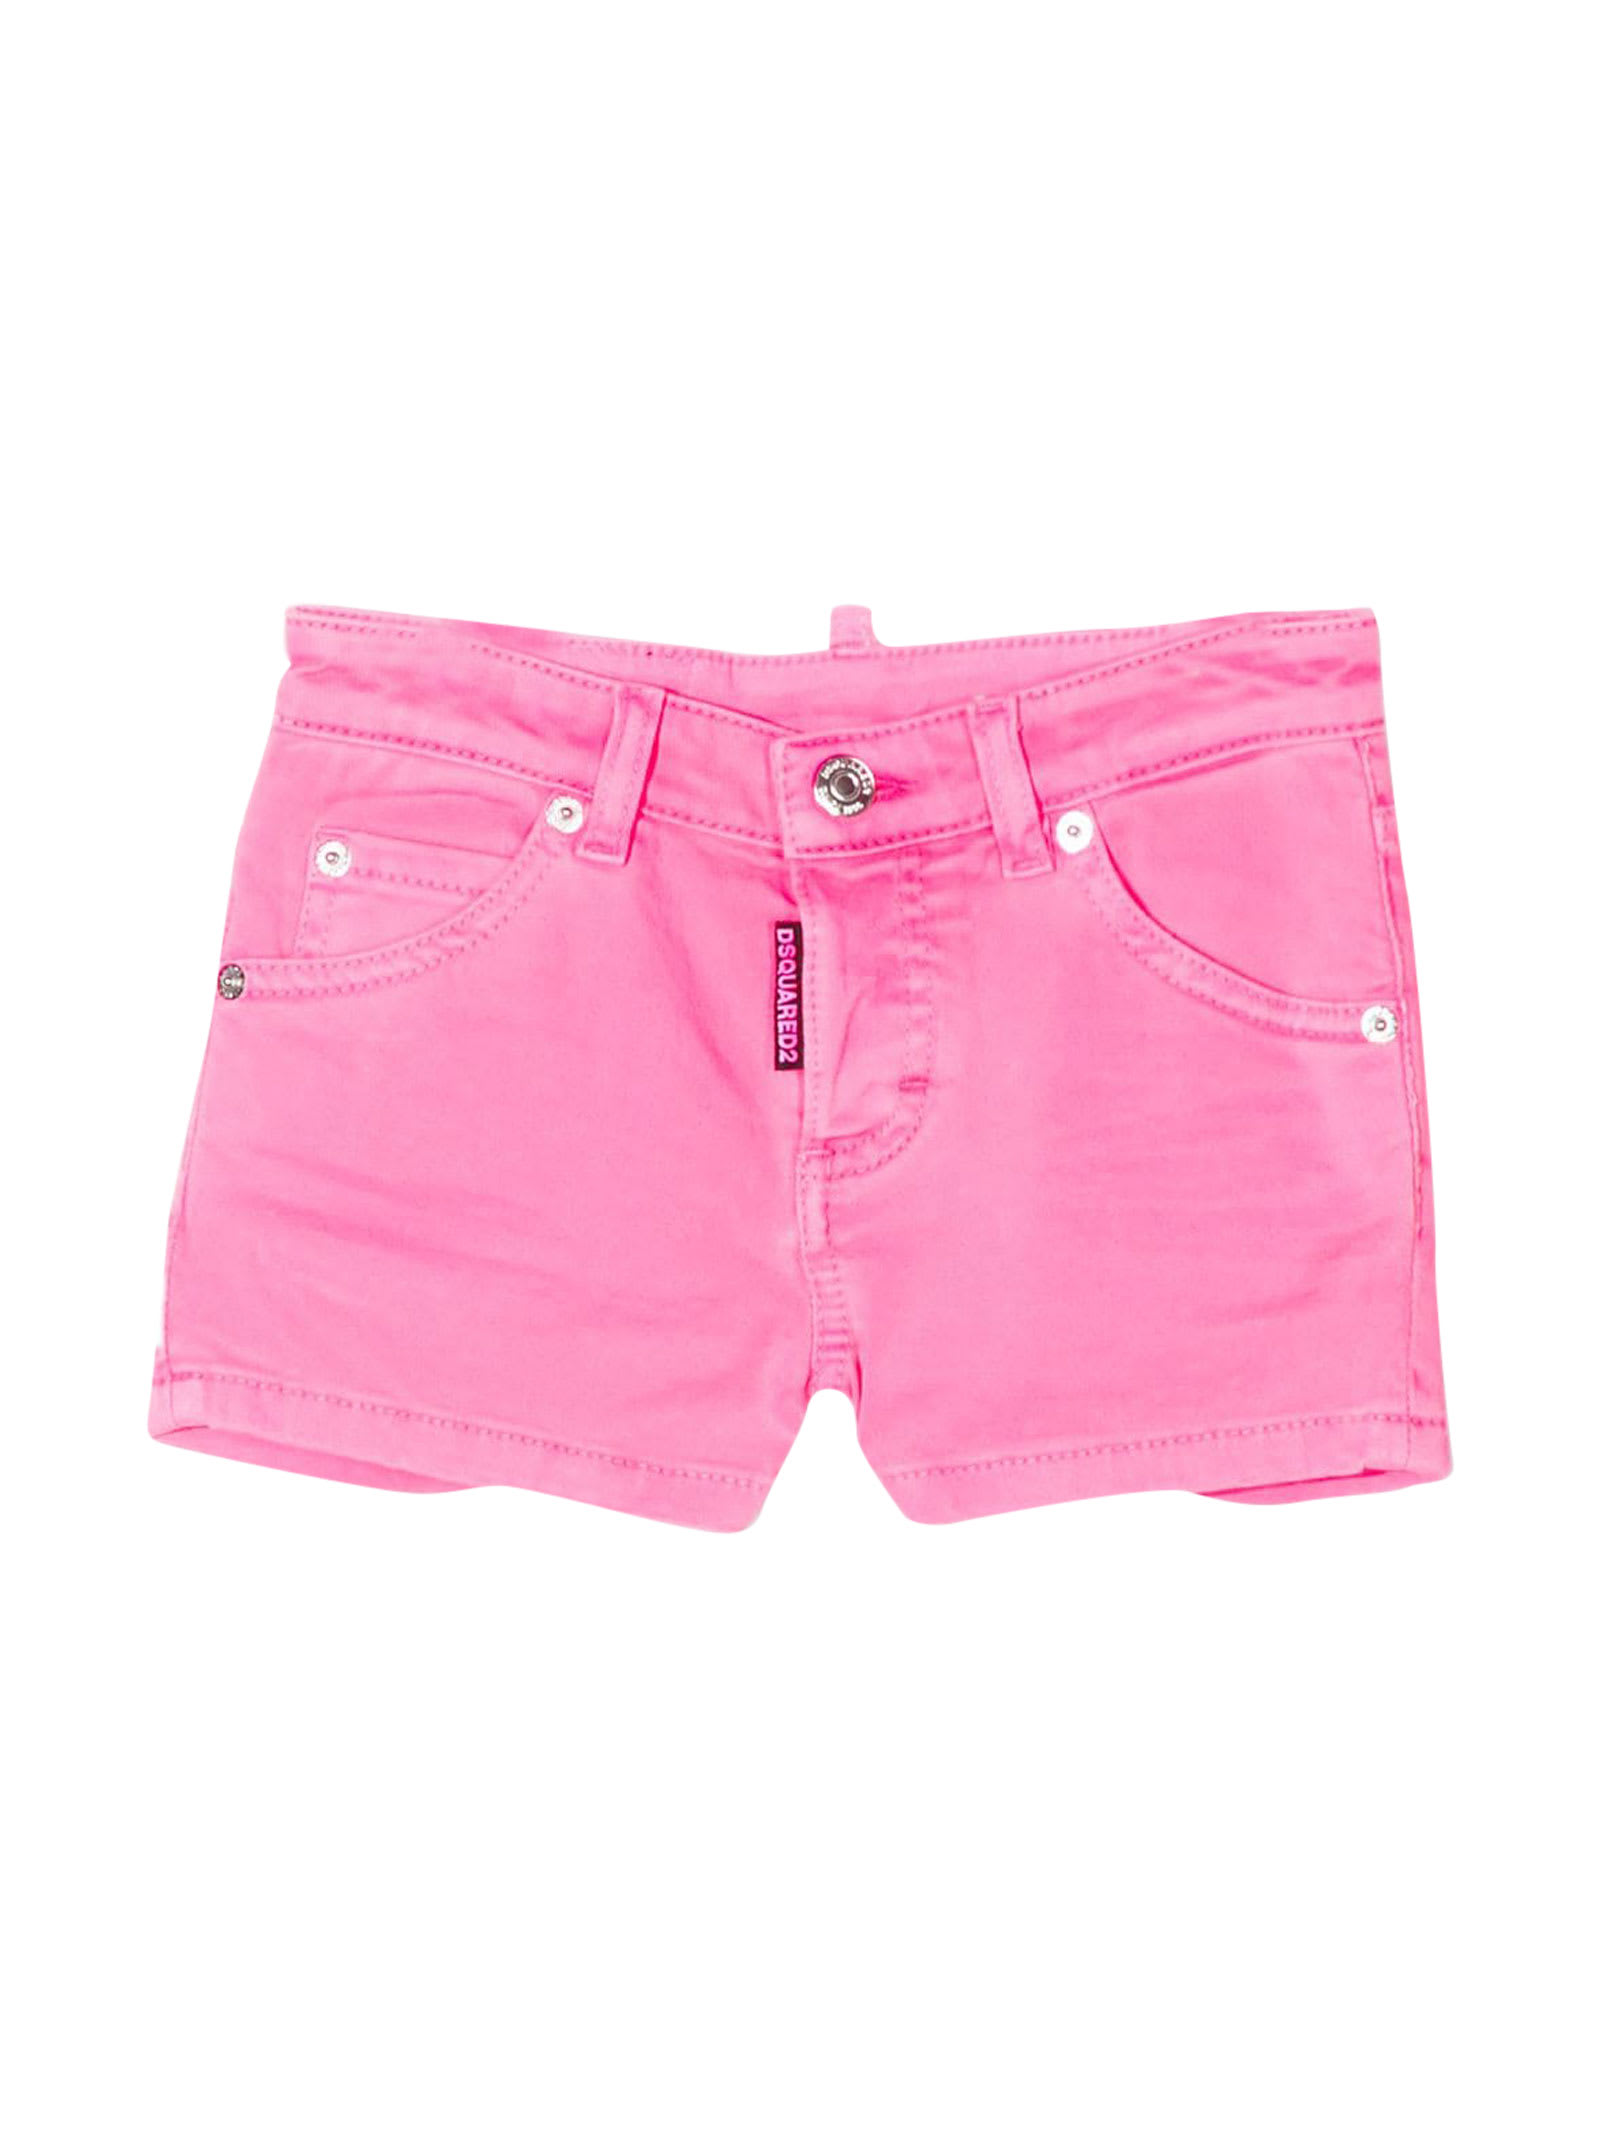 DSQUARED2 PINK SHORTS,11205336